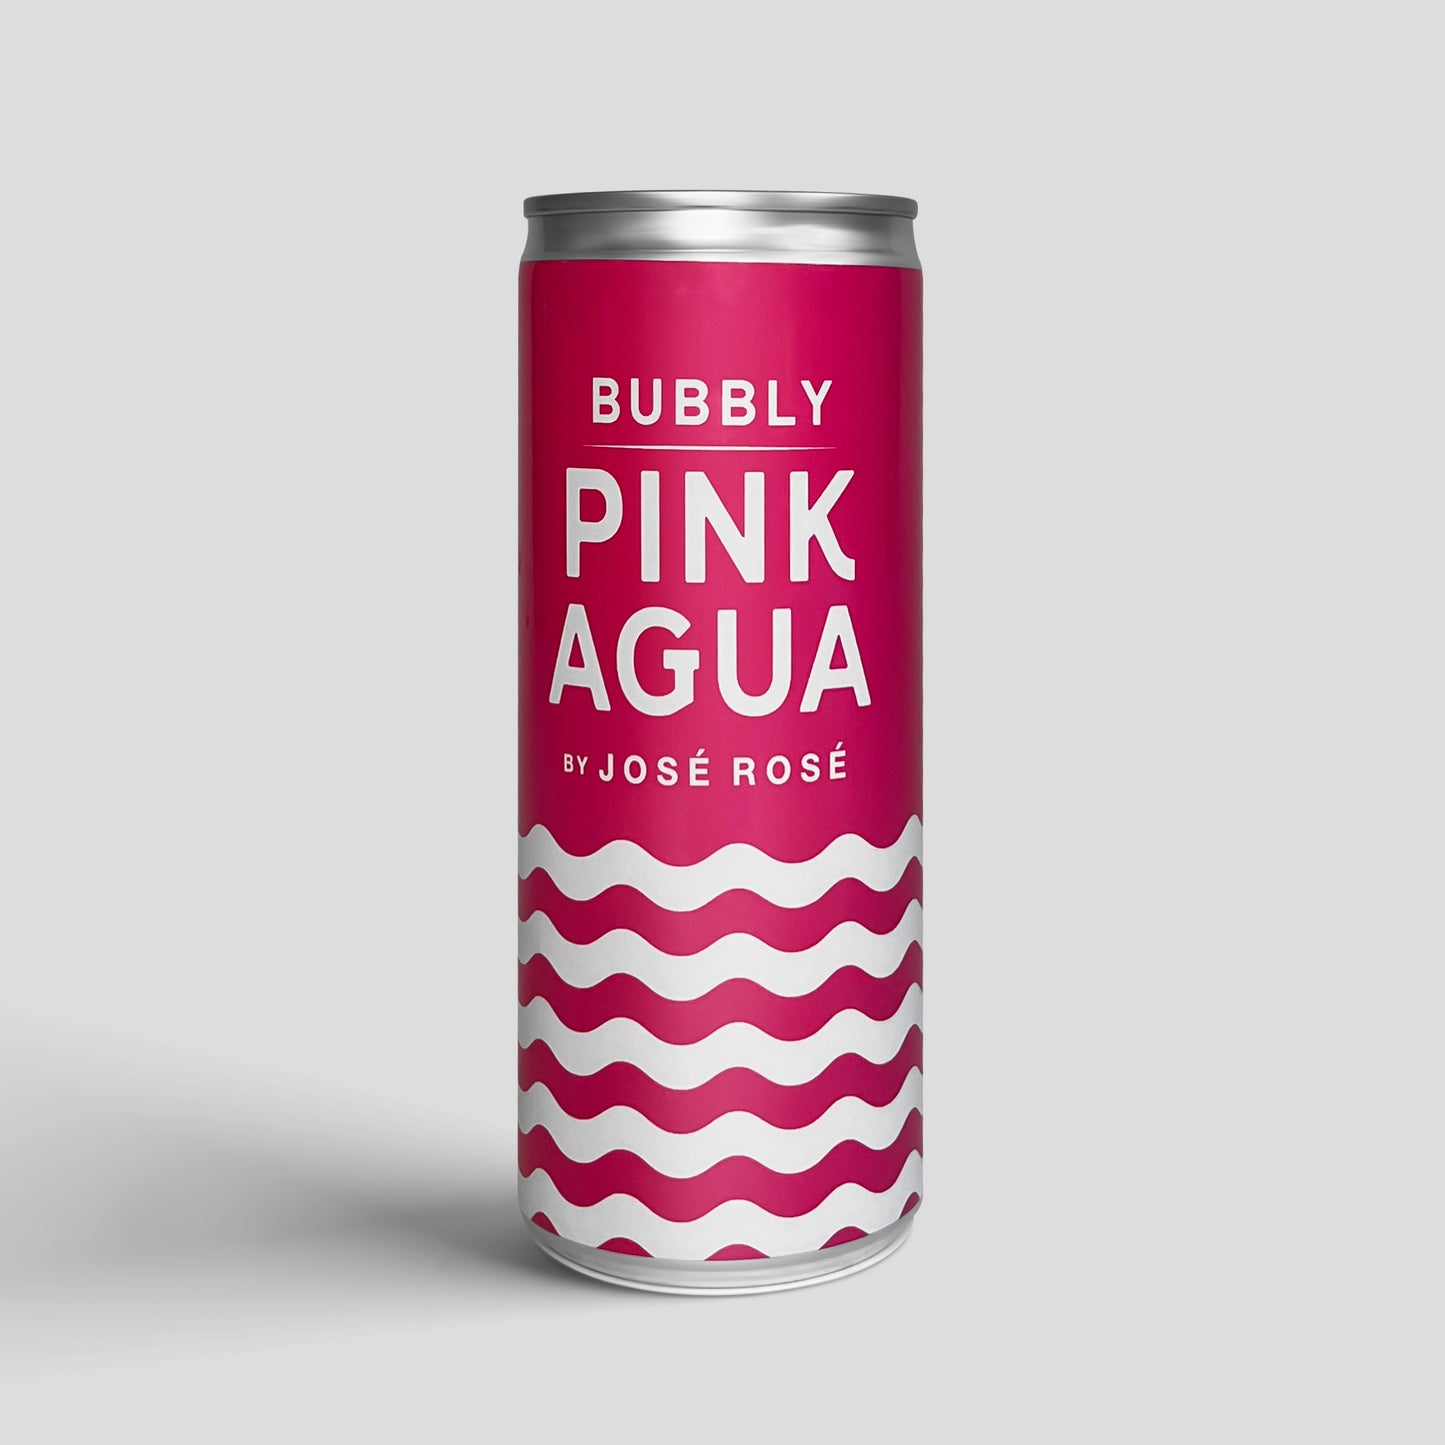 Bubbly Pink Agua